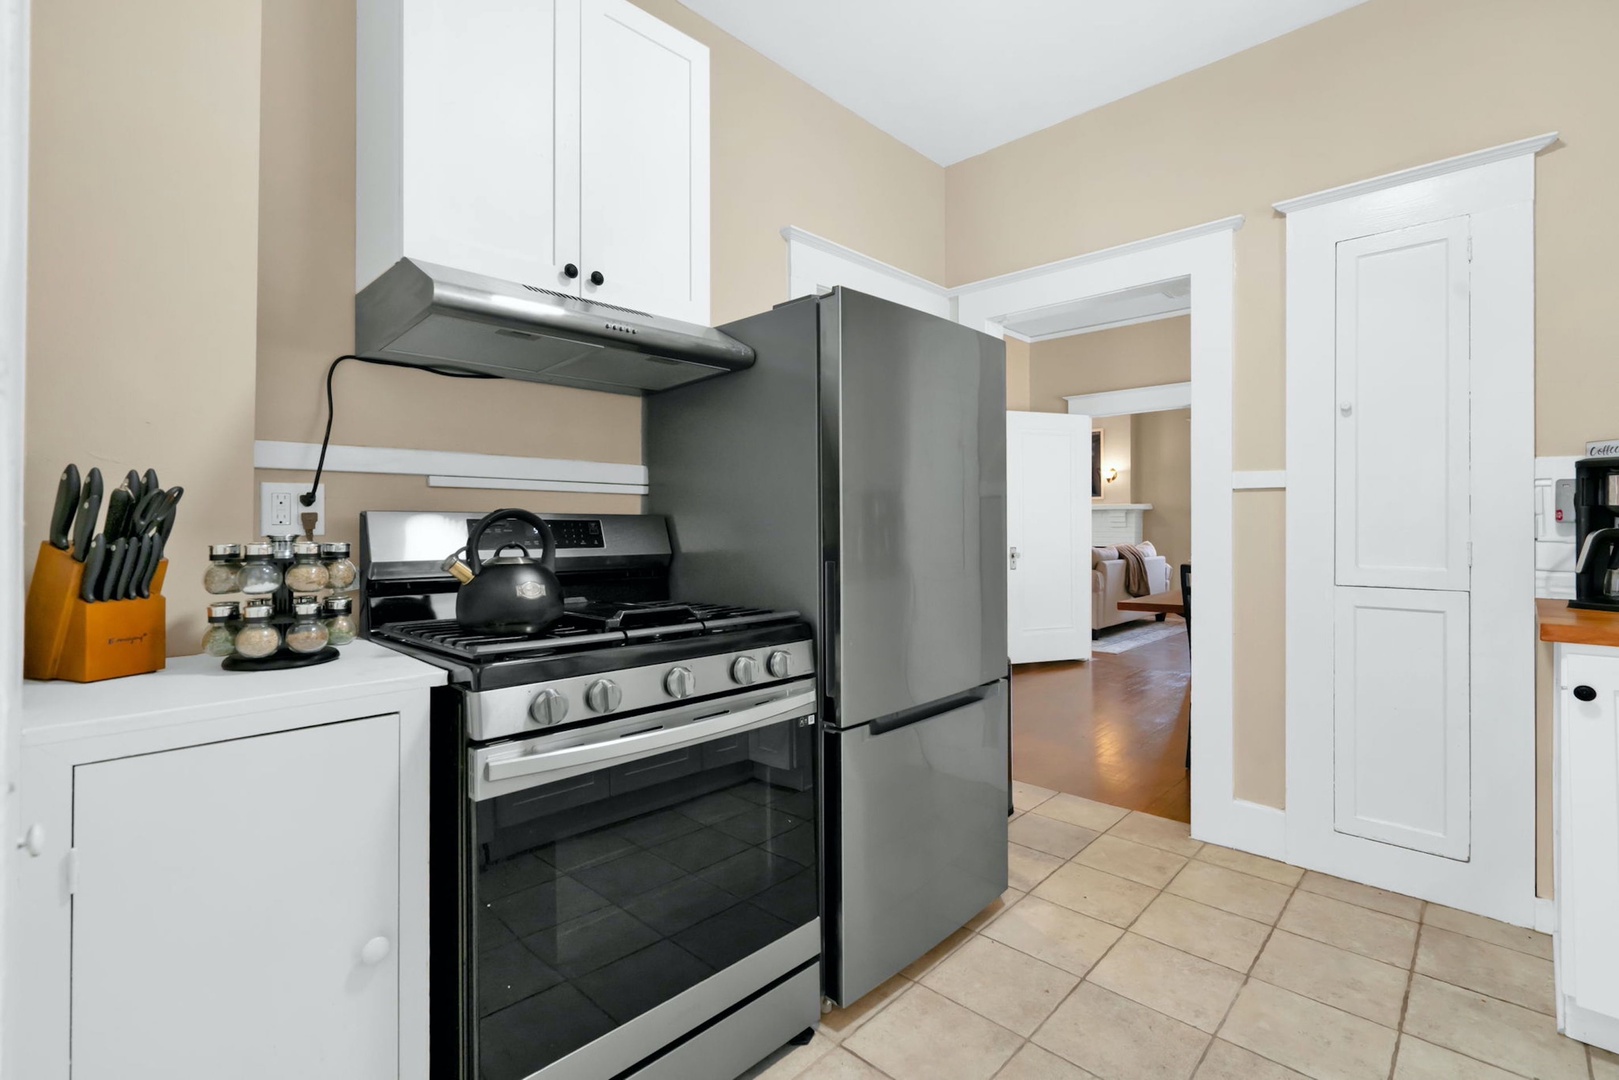 The welcoming kitchen provides ample space & all the comforts of home